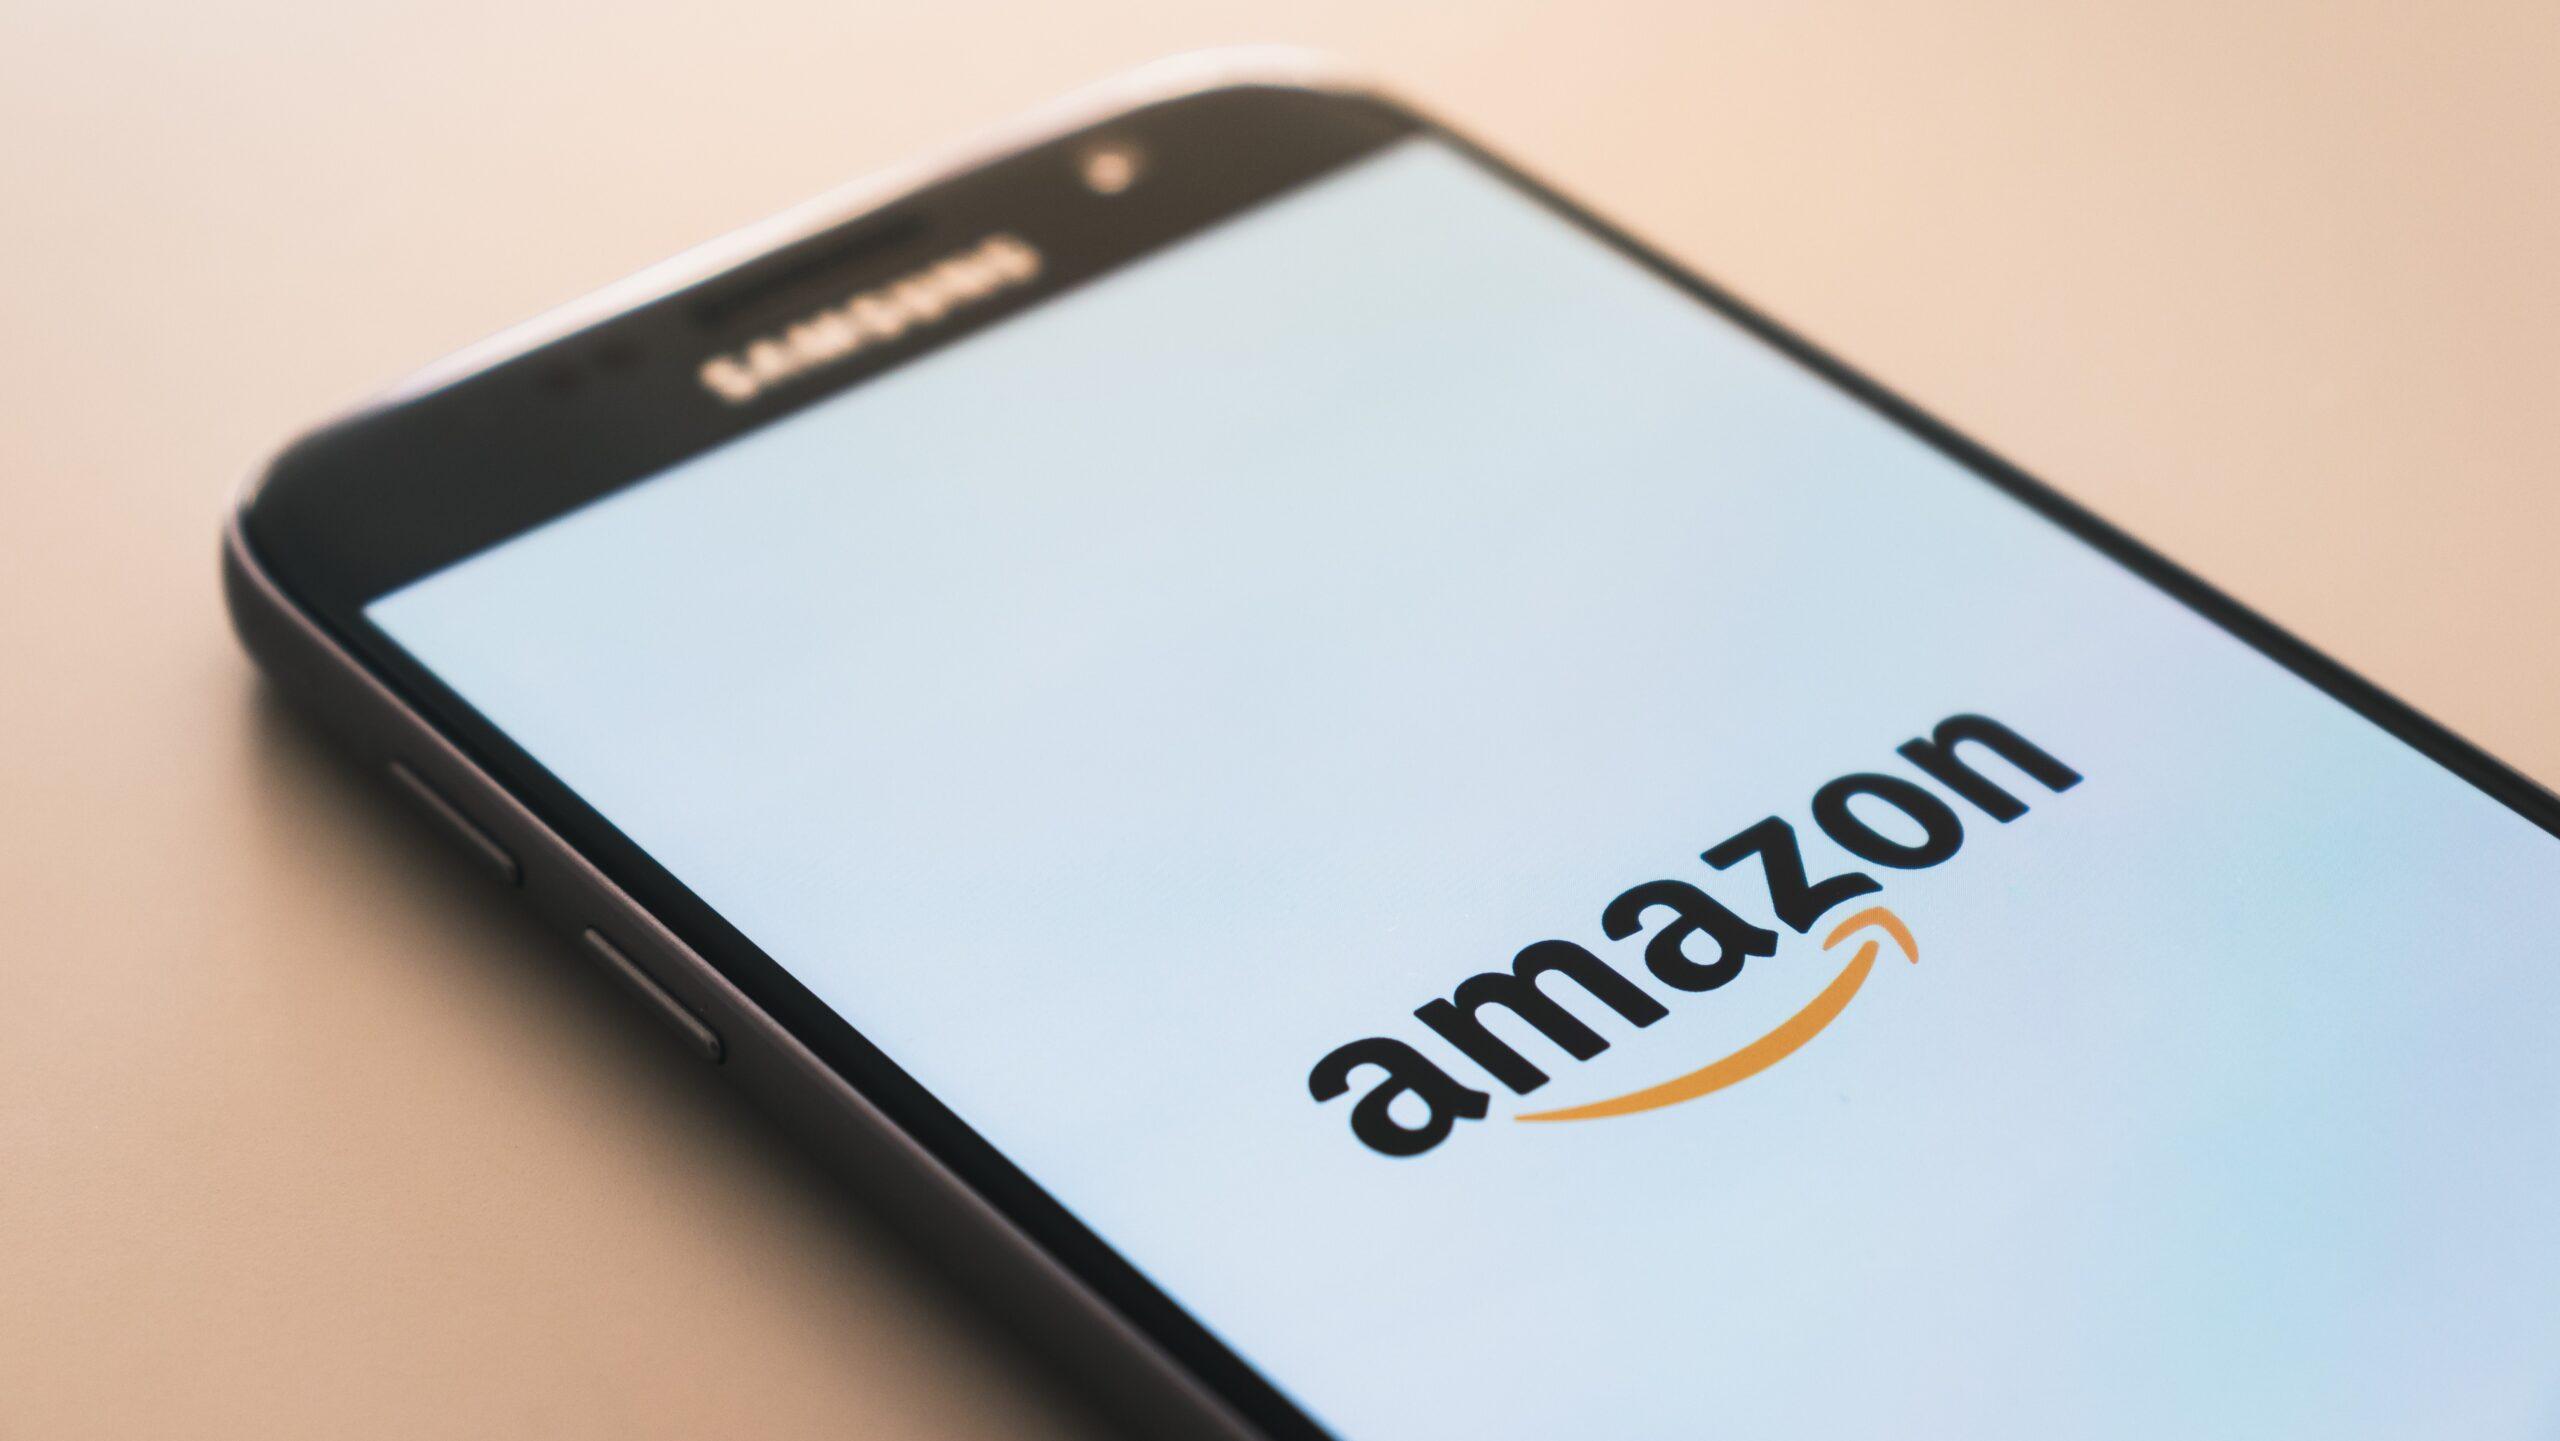 Amazon logo appearing on a smartphone.